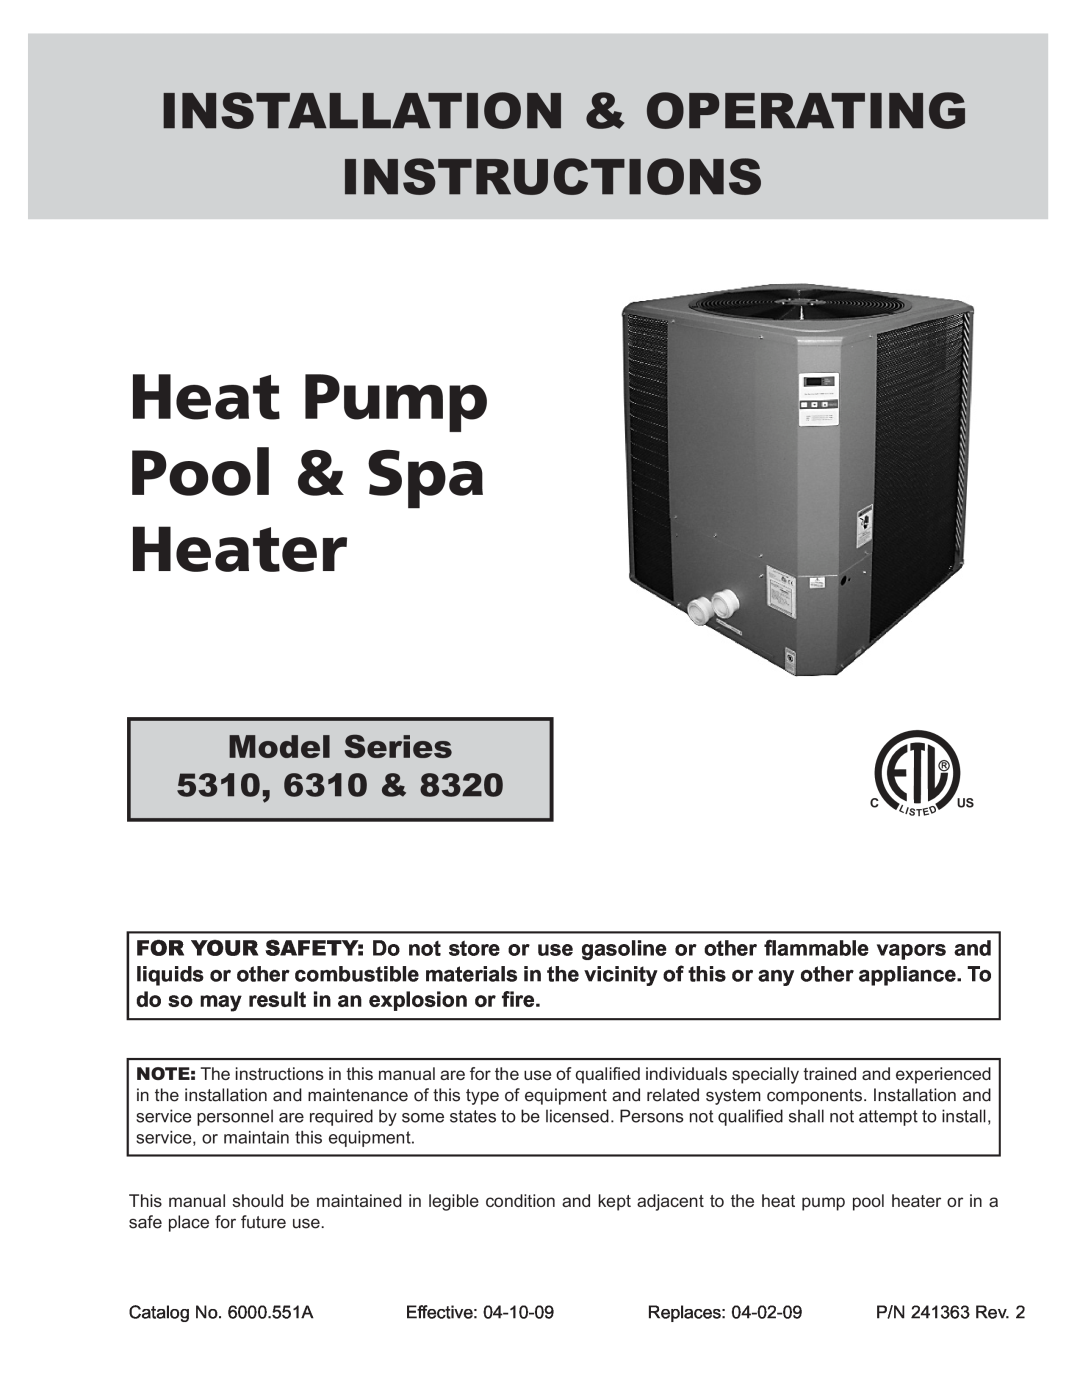 Energy Tech Laboratories 6310 operating instructions Heat Pump Pool & Spa Heater, Installation & Operating Instructions 